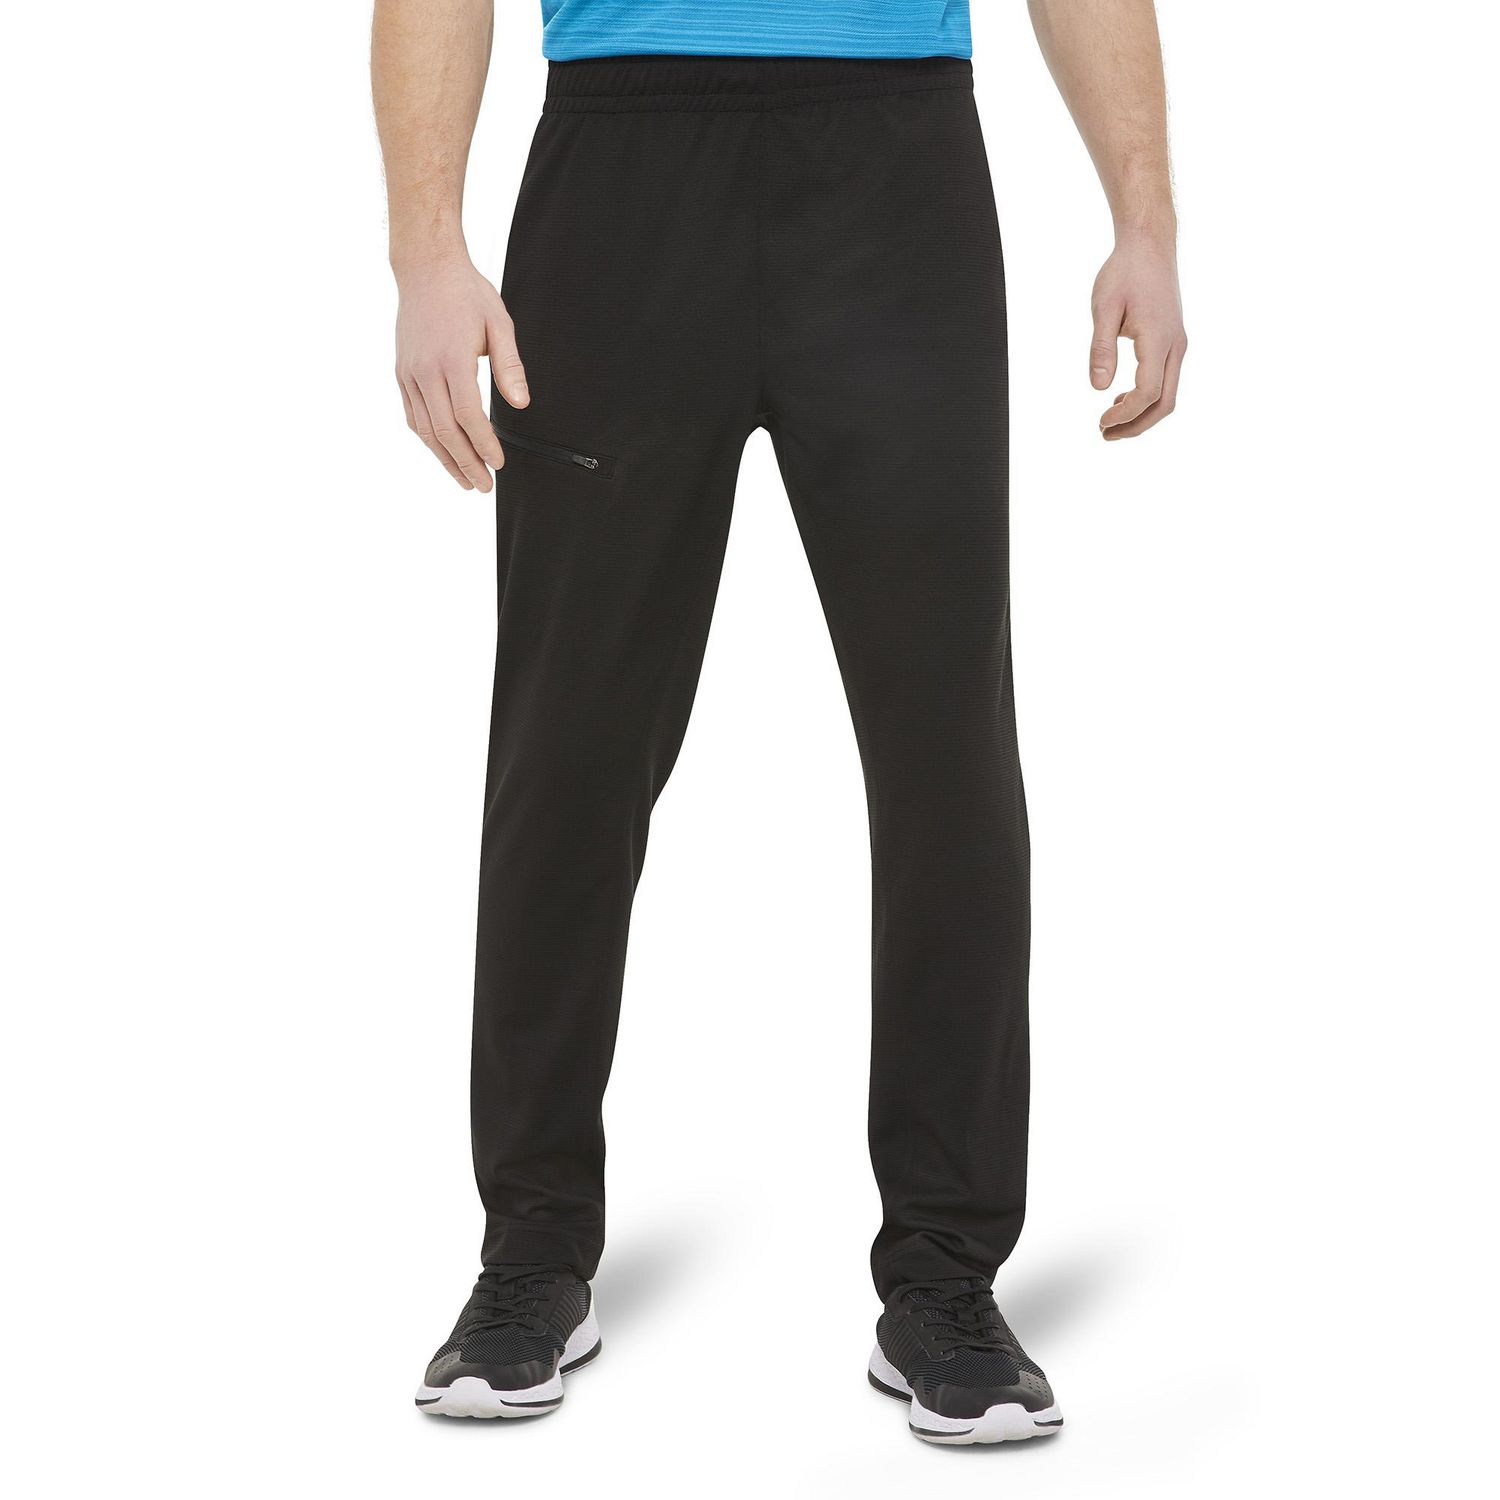 Athletic Works Men's Textured Knit Pants | Walmart Canada